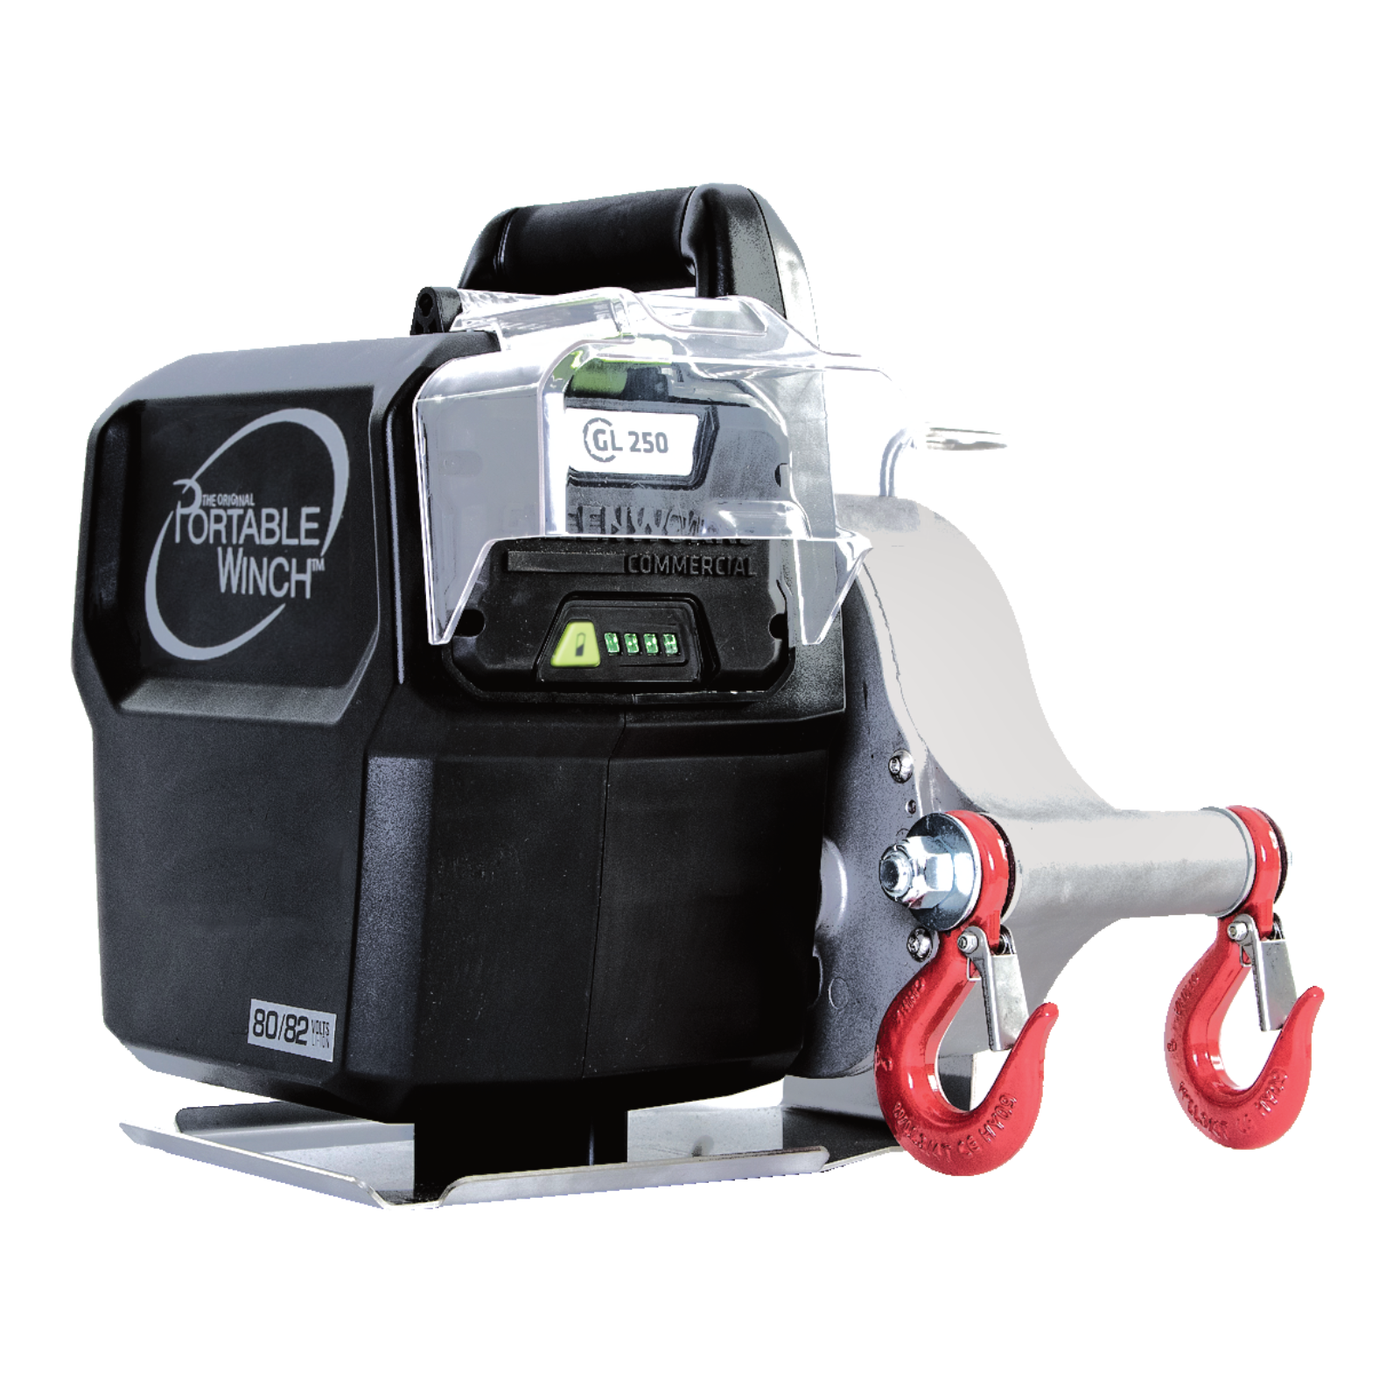 Battery powered portable winch - 3